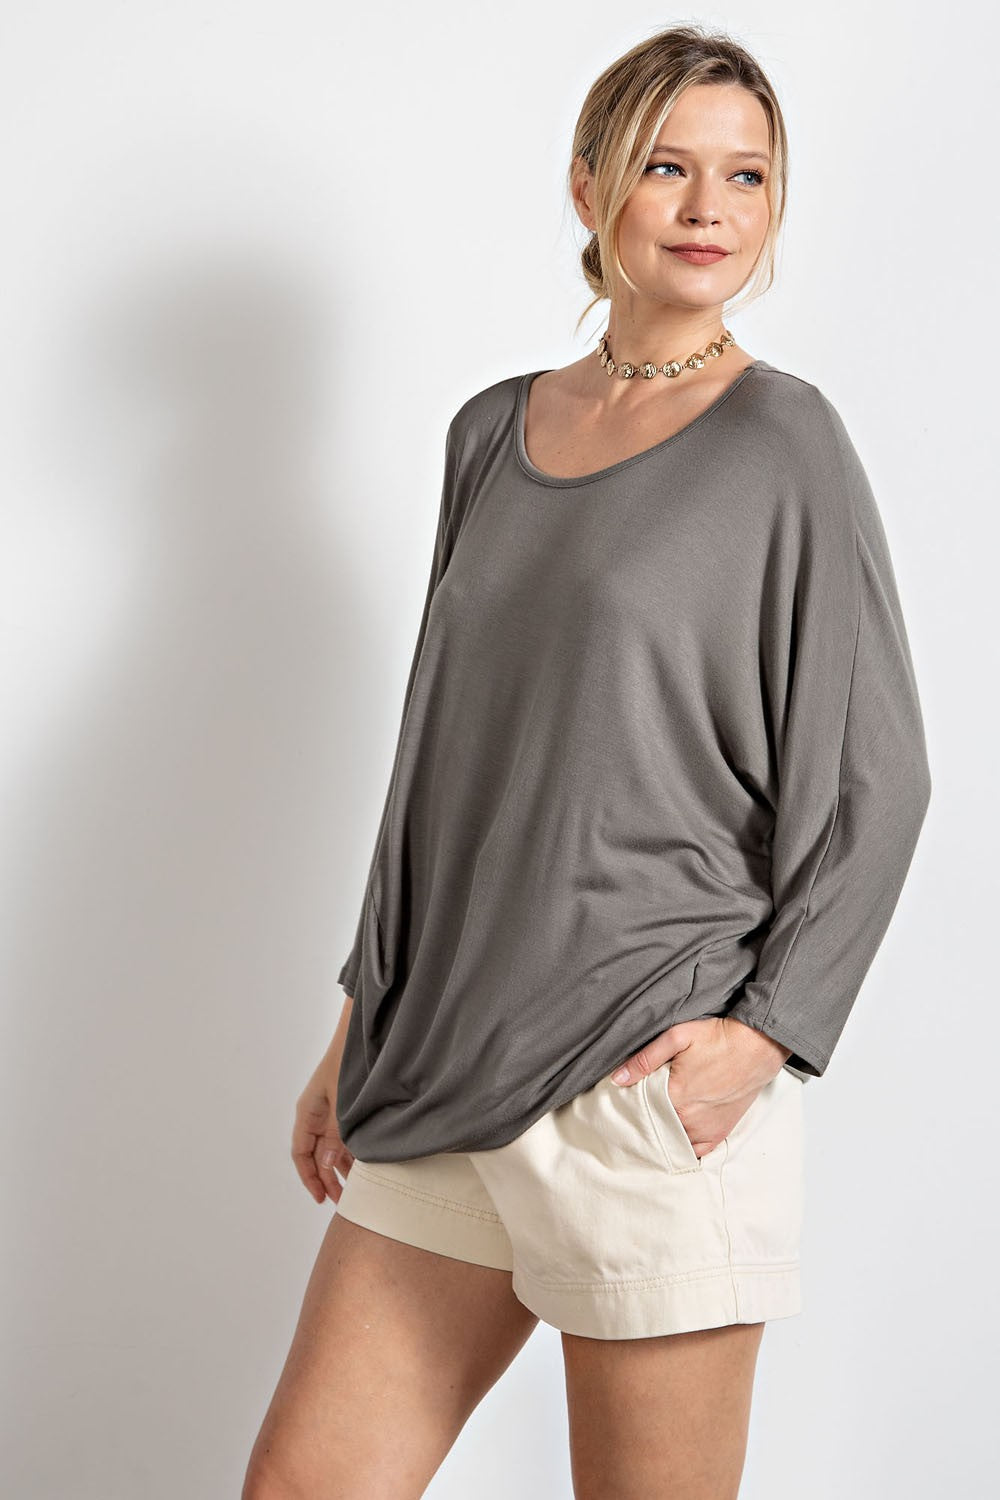 Easel Faded Olive Asymmetrical Hem Long Sleeve Top - Roulhac Fashion Boutique